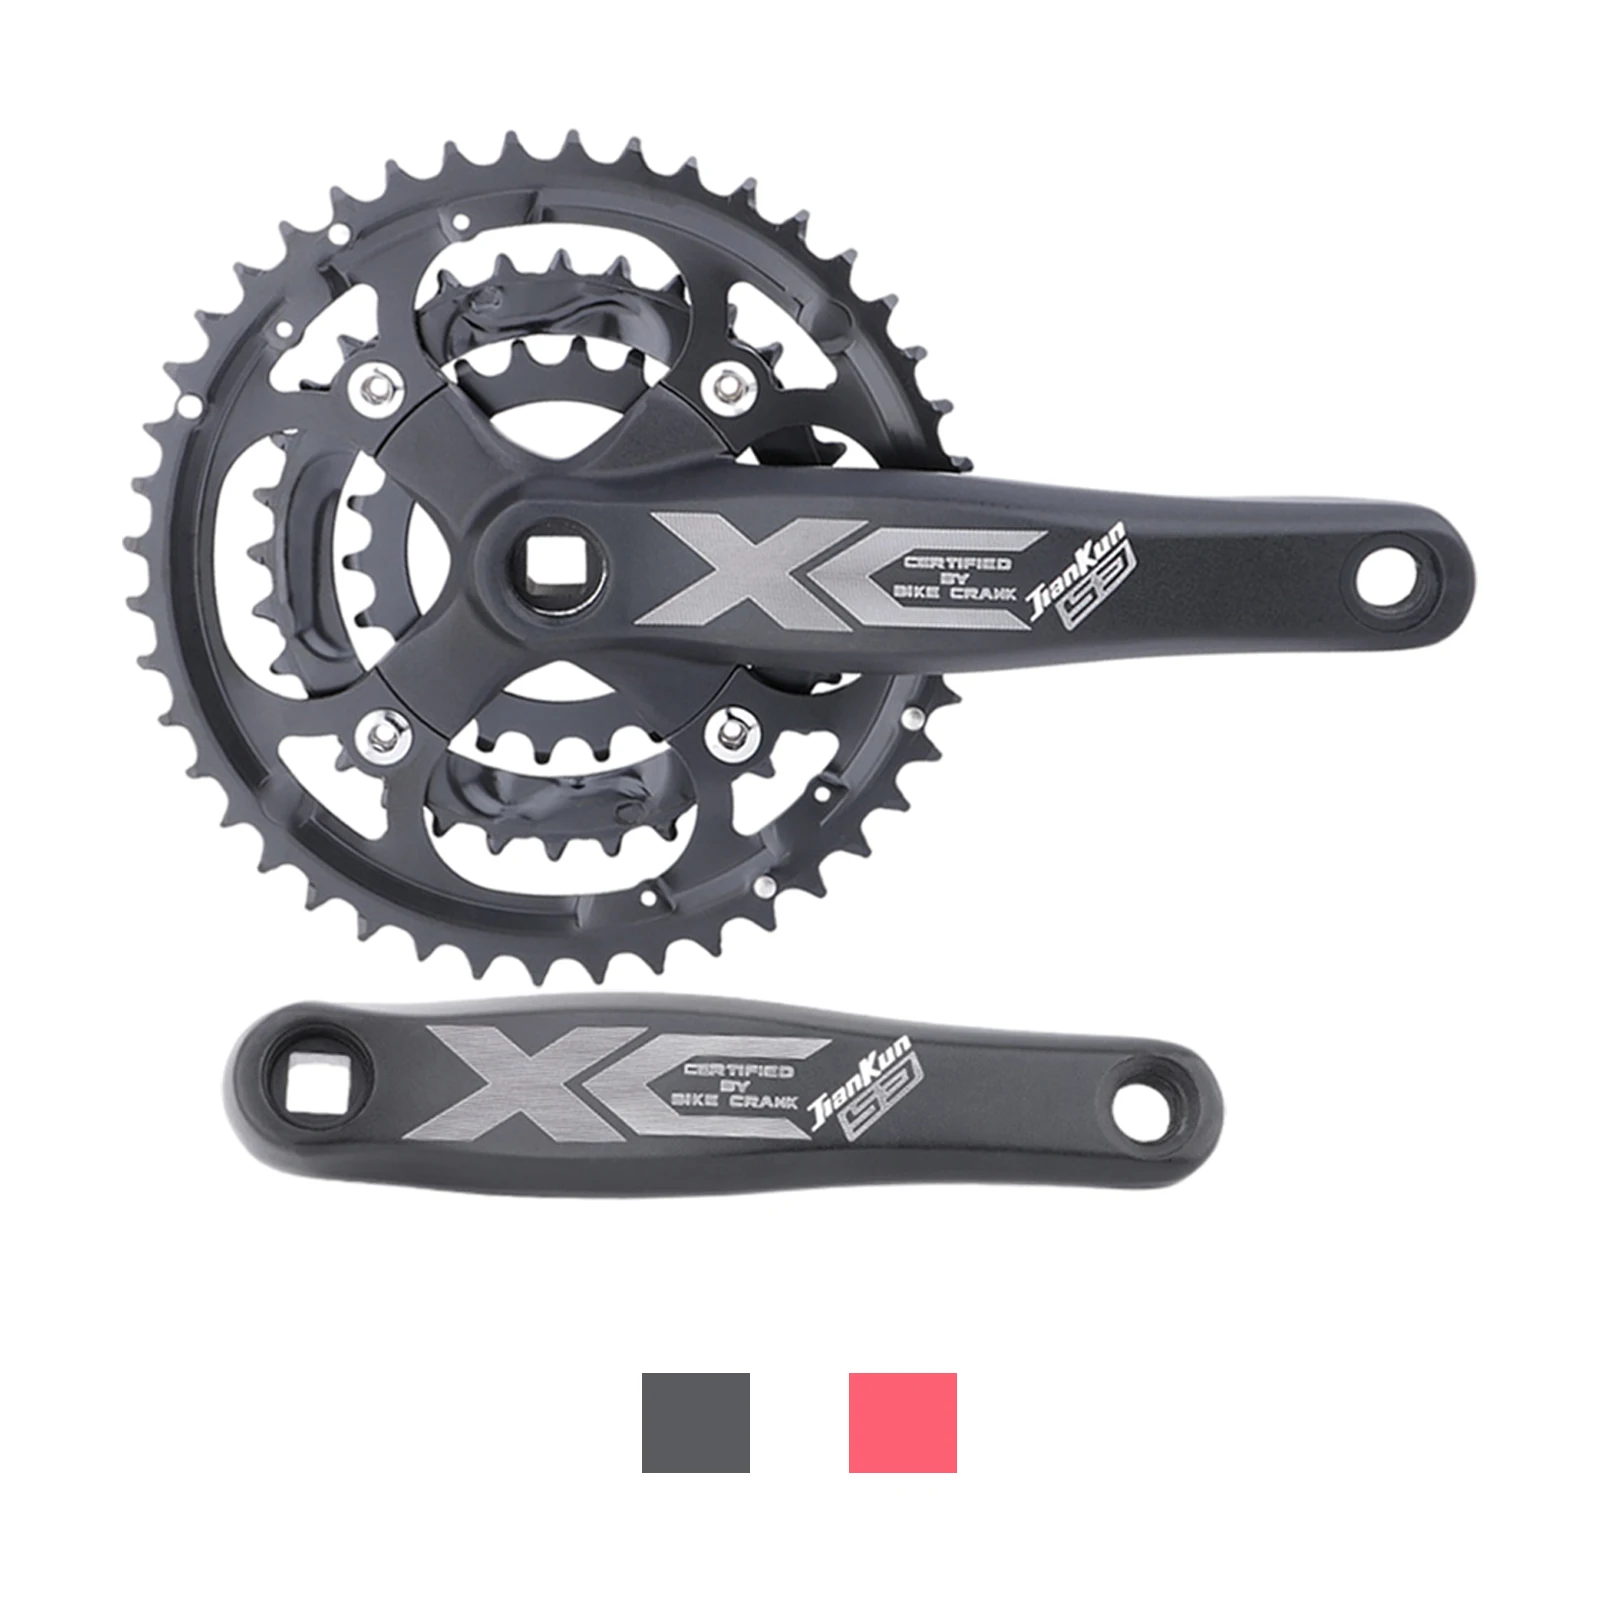 8 9 Speed Bicycle Crankset Arm Single Speed Crank 170mm Square Taper Fixed Modify Crank for Road Mountain Bike Gear